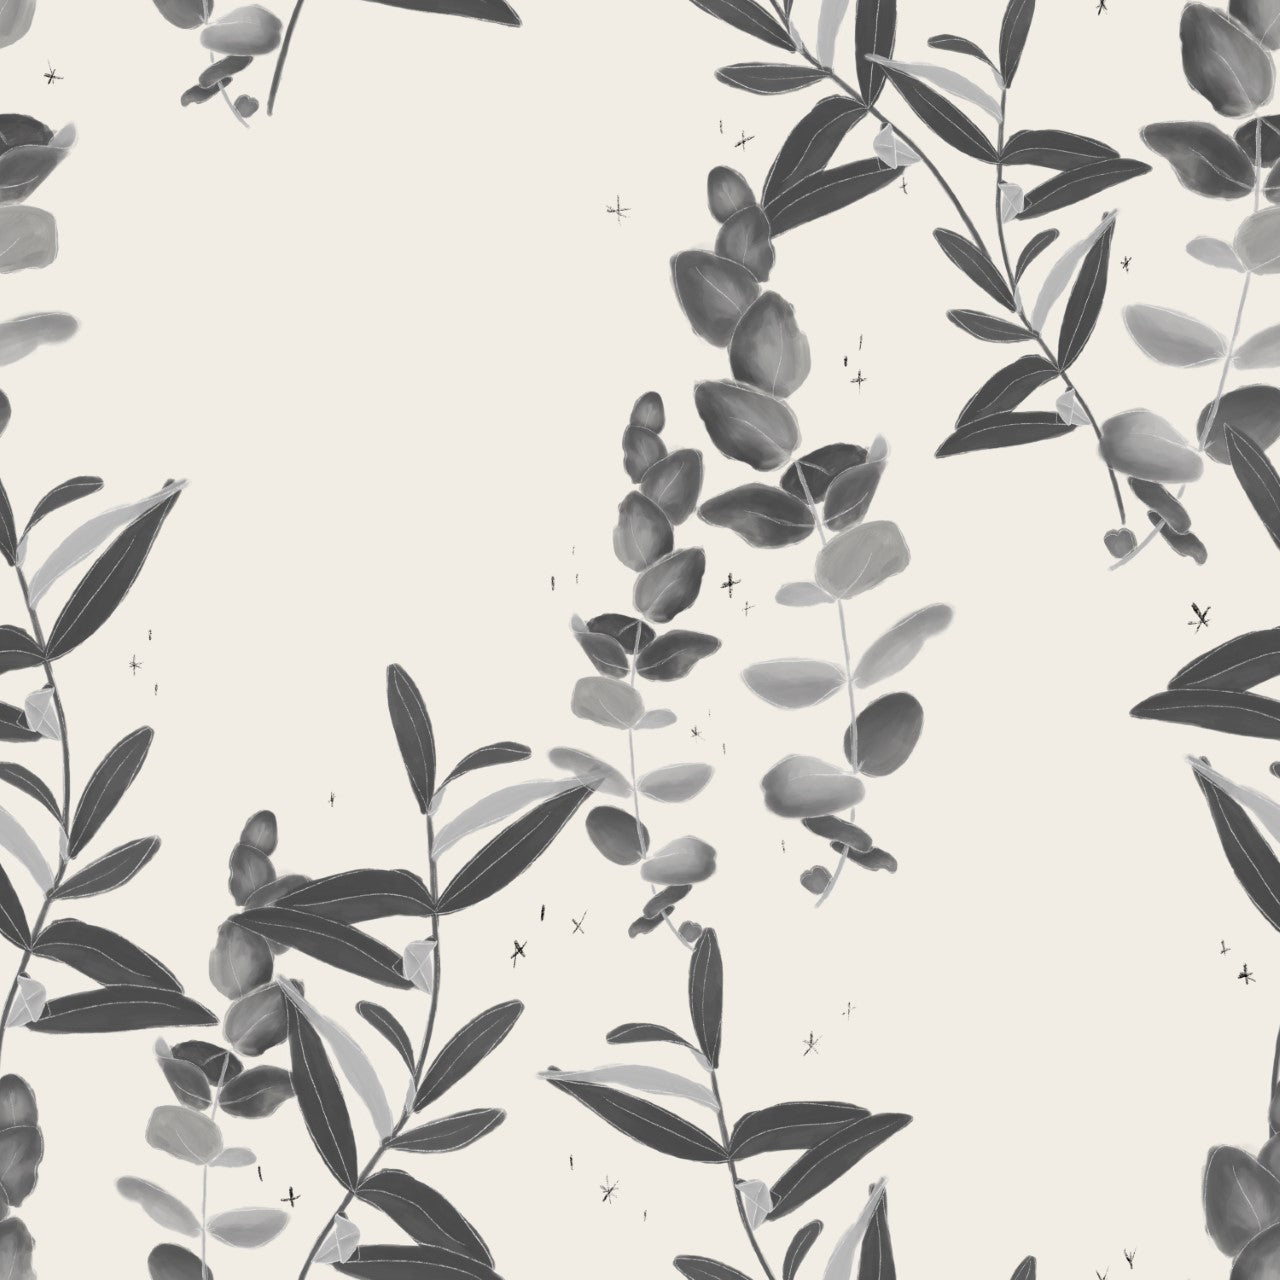 Muted green/grey/gray eucalyptus & olive foliage/leaves on cream background easy to install and remove peel and stick custom wallpaper available in different lengths/sizes locally created and printed in Canada. Removable, washable, durable, commercial grade, customizable and water proof.